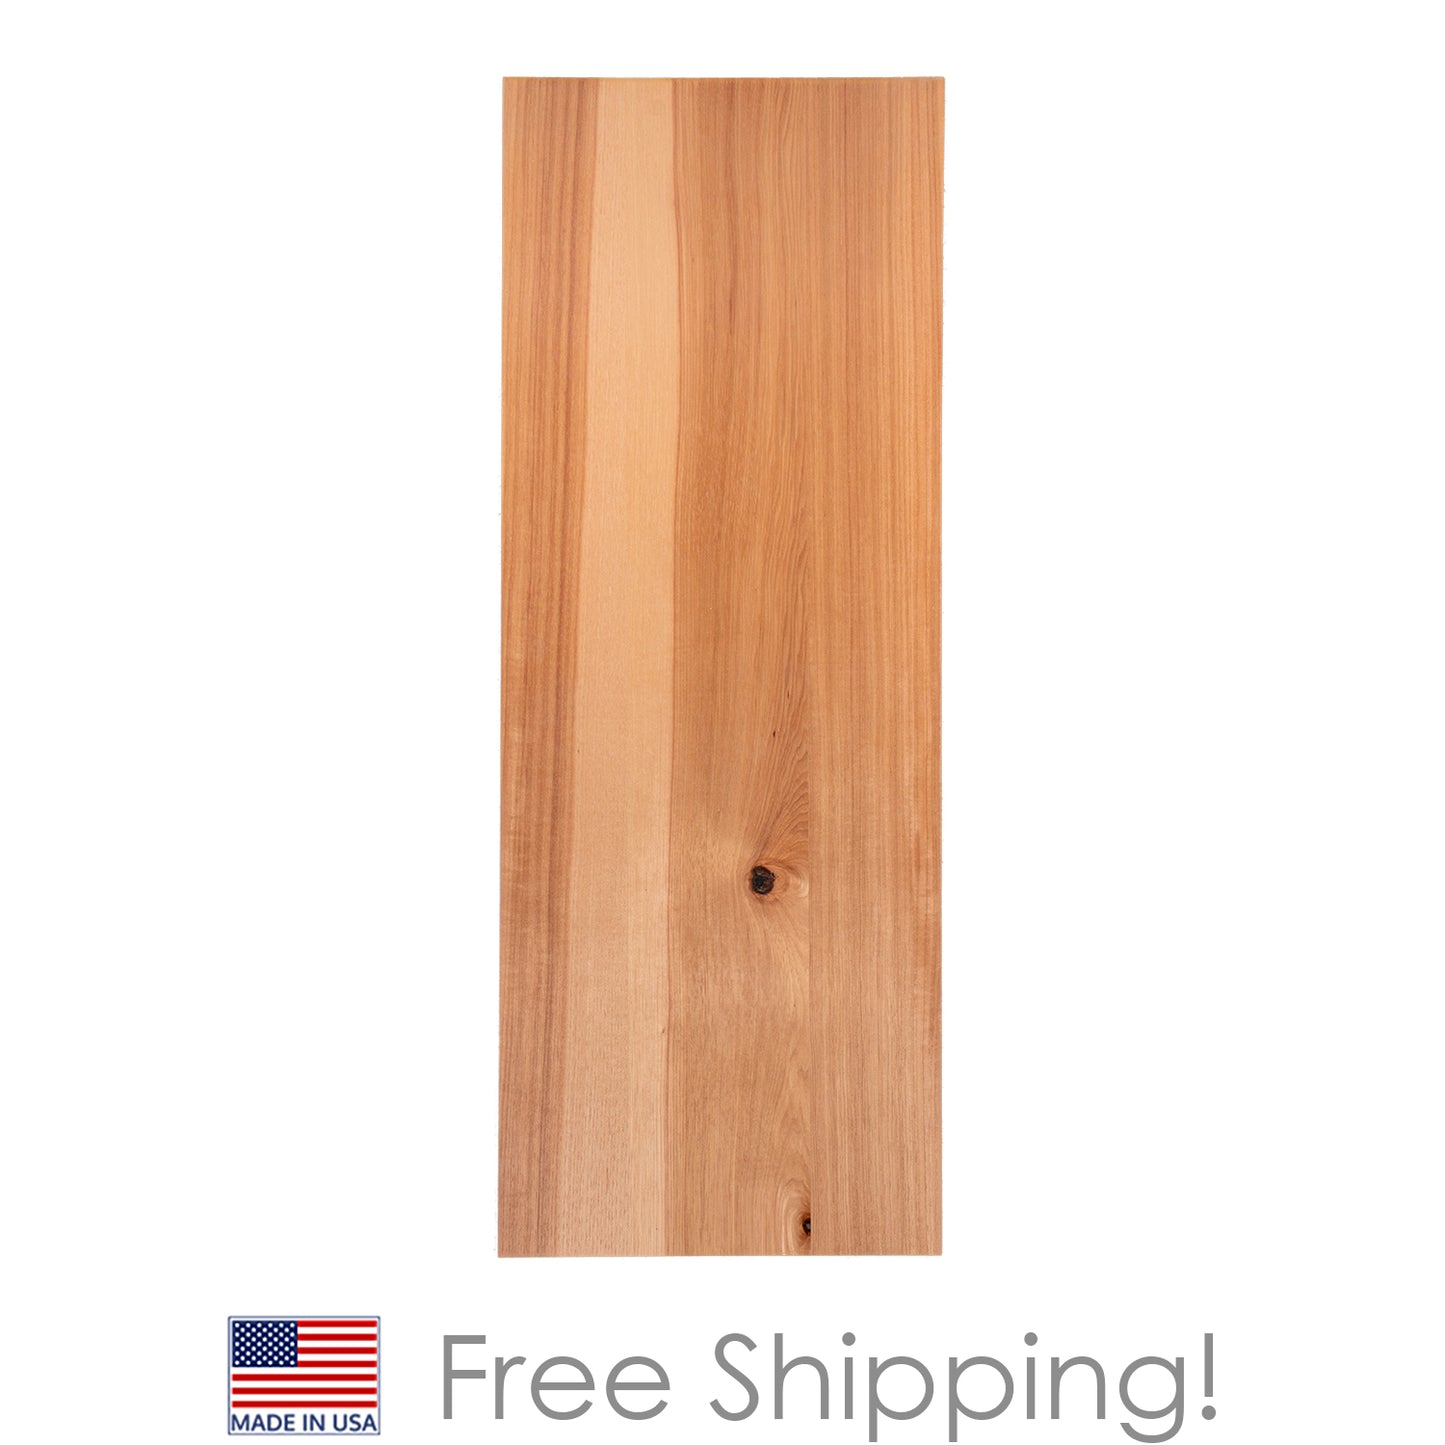 Quicklock RTA (Ready-to-Assemble) Rustic Hickory .25"X11.25"X30" End Panel